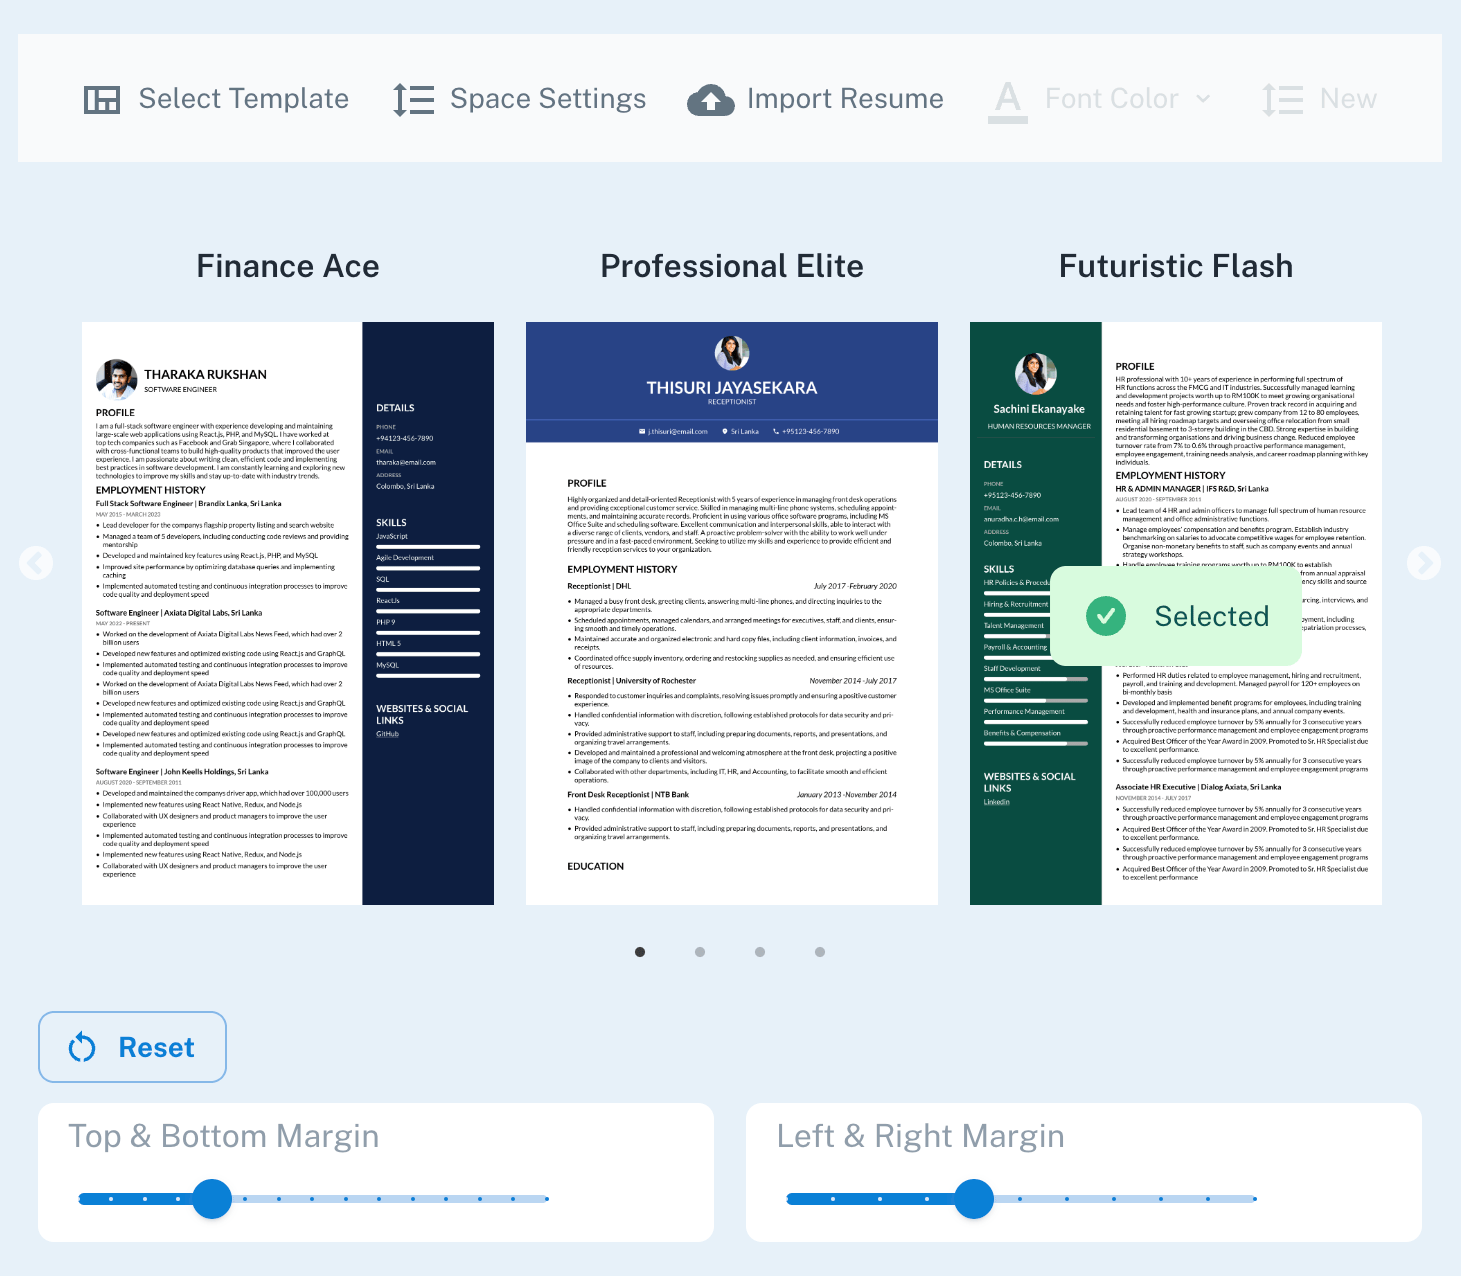 Our resume editor screenshot. to better user understand